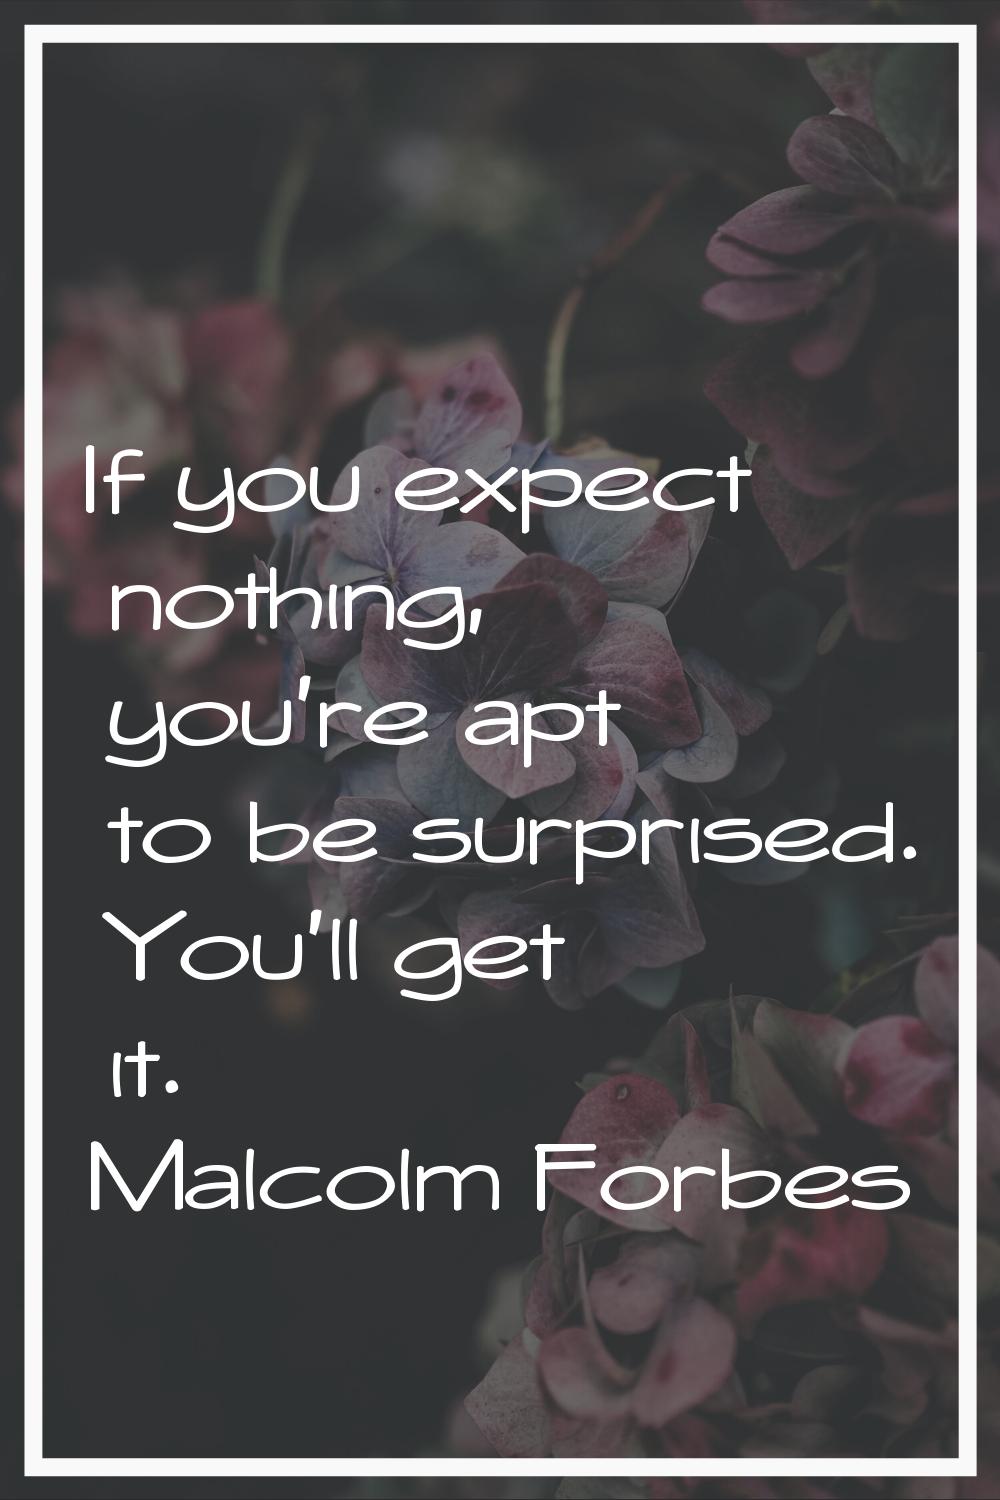 If you expect nothing, you're apt to be surprised. You'll get it.